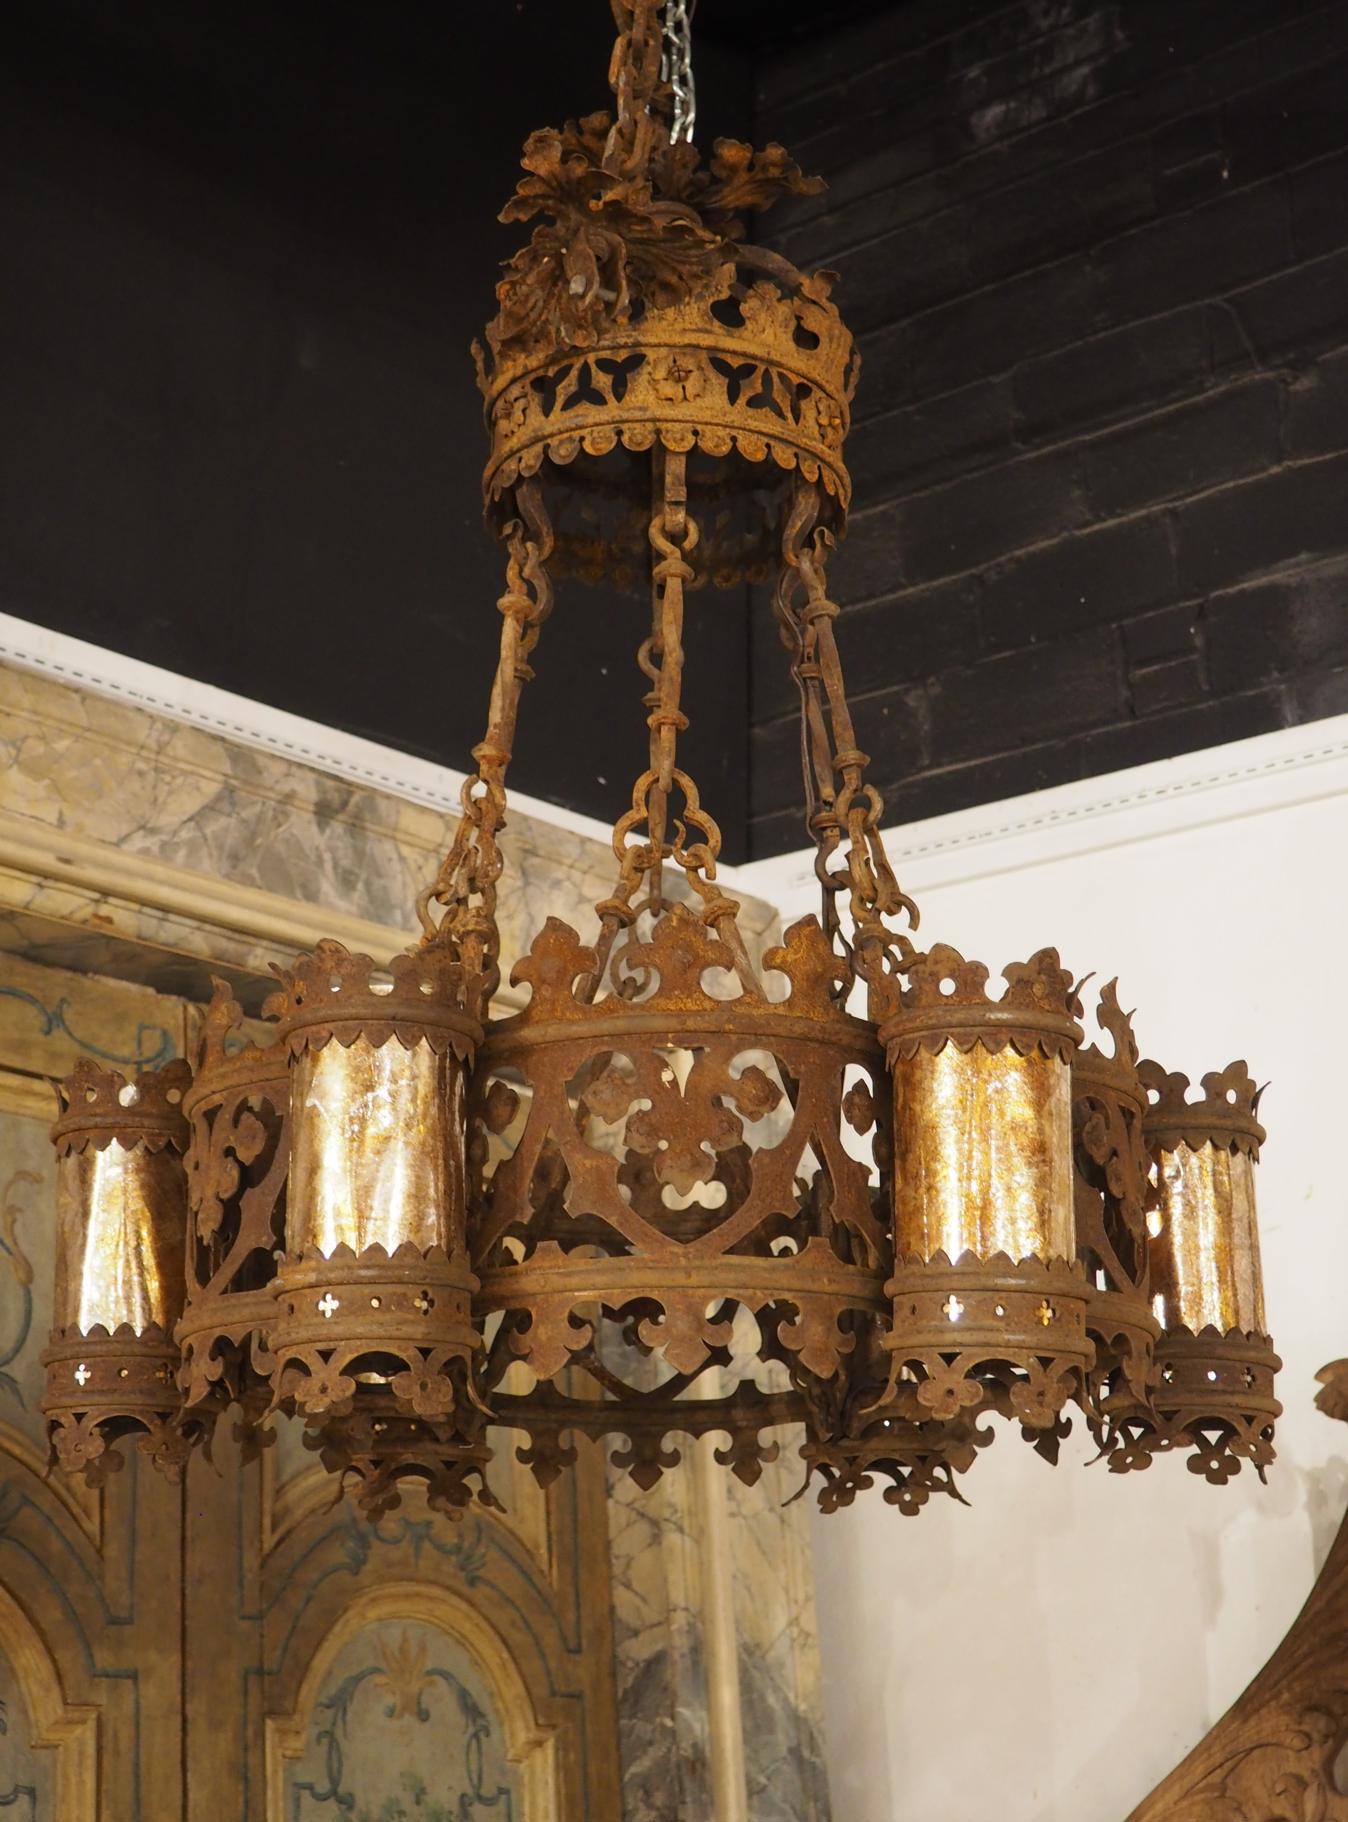 Stunning 8-arm Brass and Crystal Chandelier Made in Spain